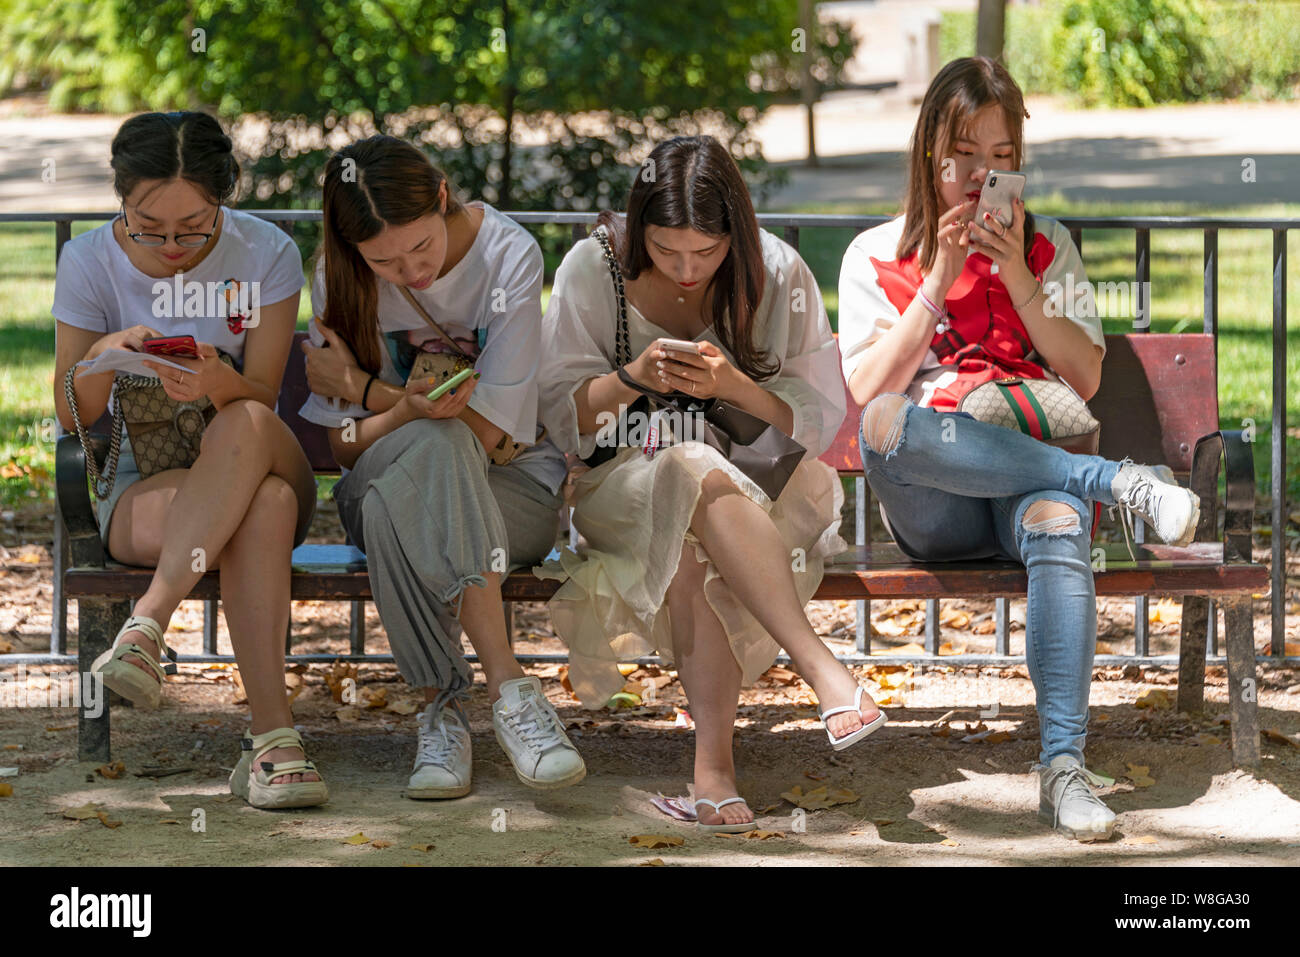 Horizontal portrait of four Asian friends sitting together on a park bench using their phones. Stock Photo